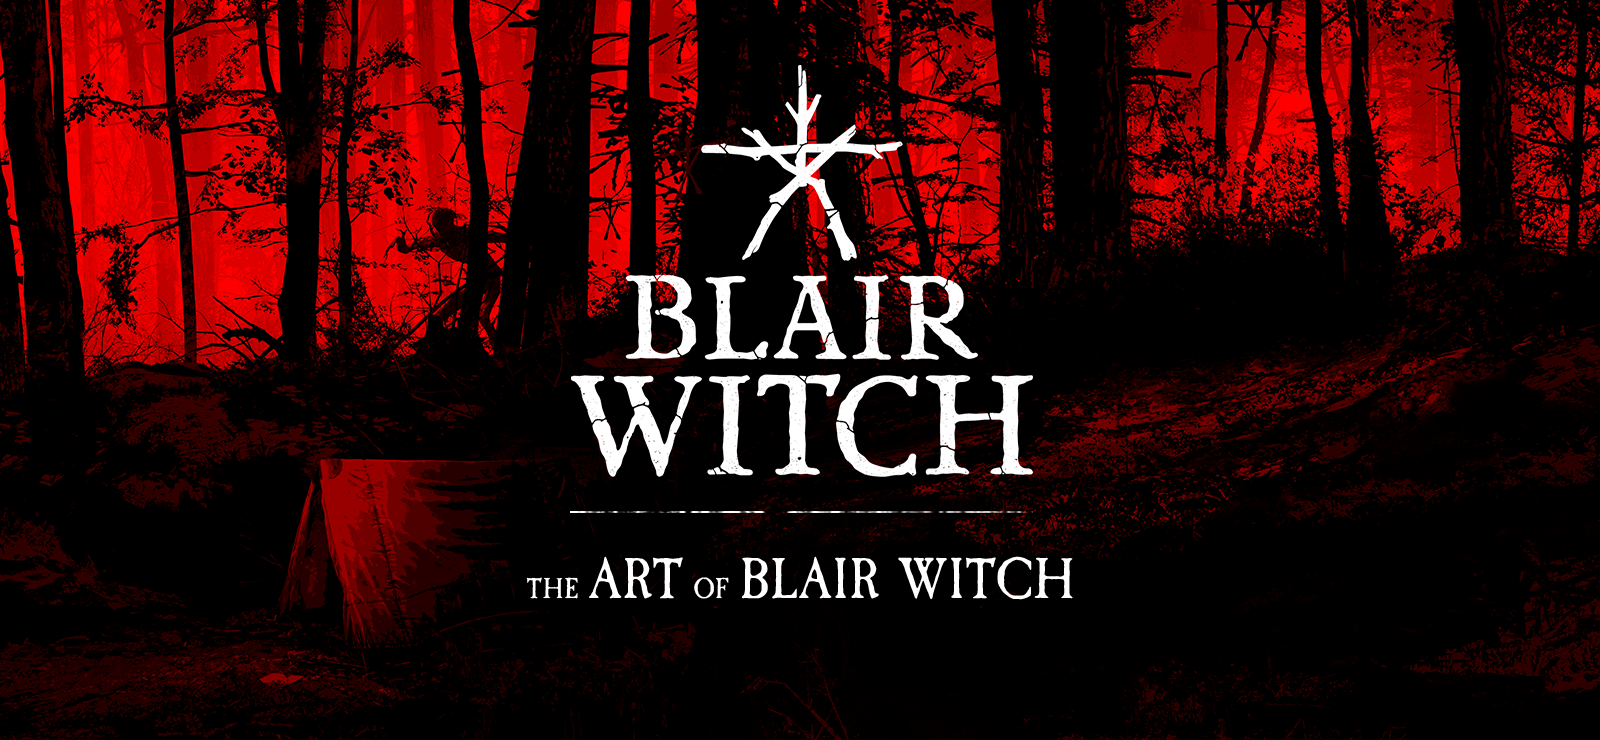 The Art Of Blair Witch